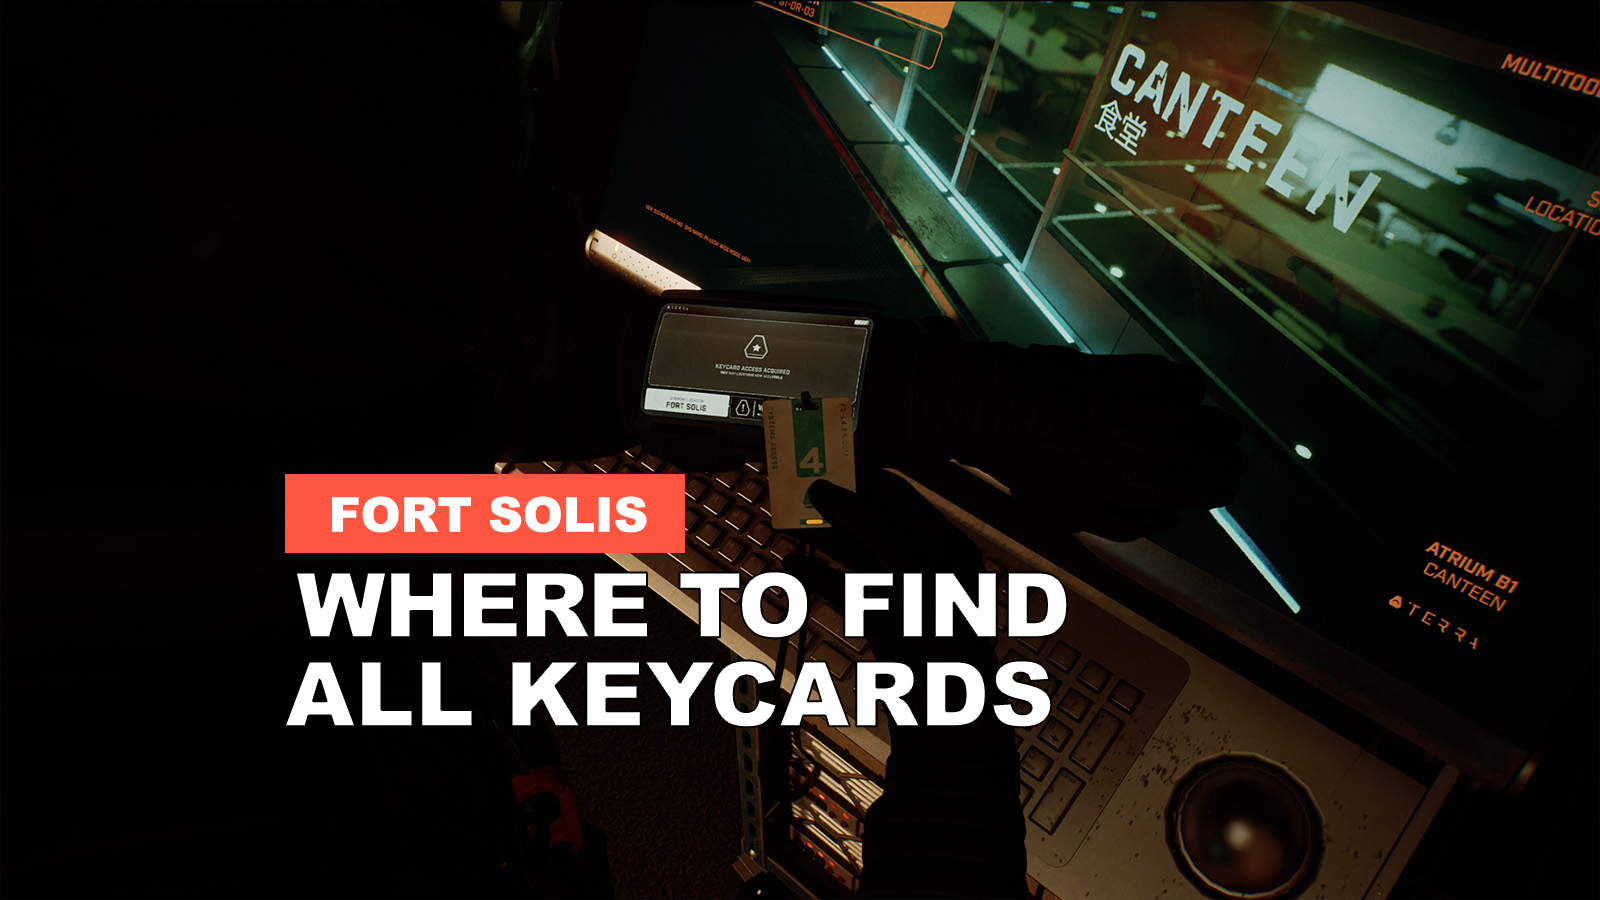 Where To Find All Keycards In Fort Solis